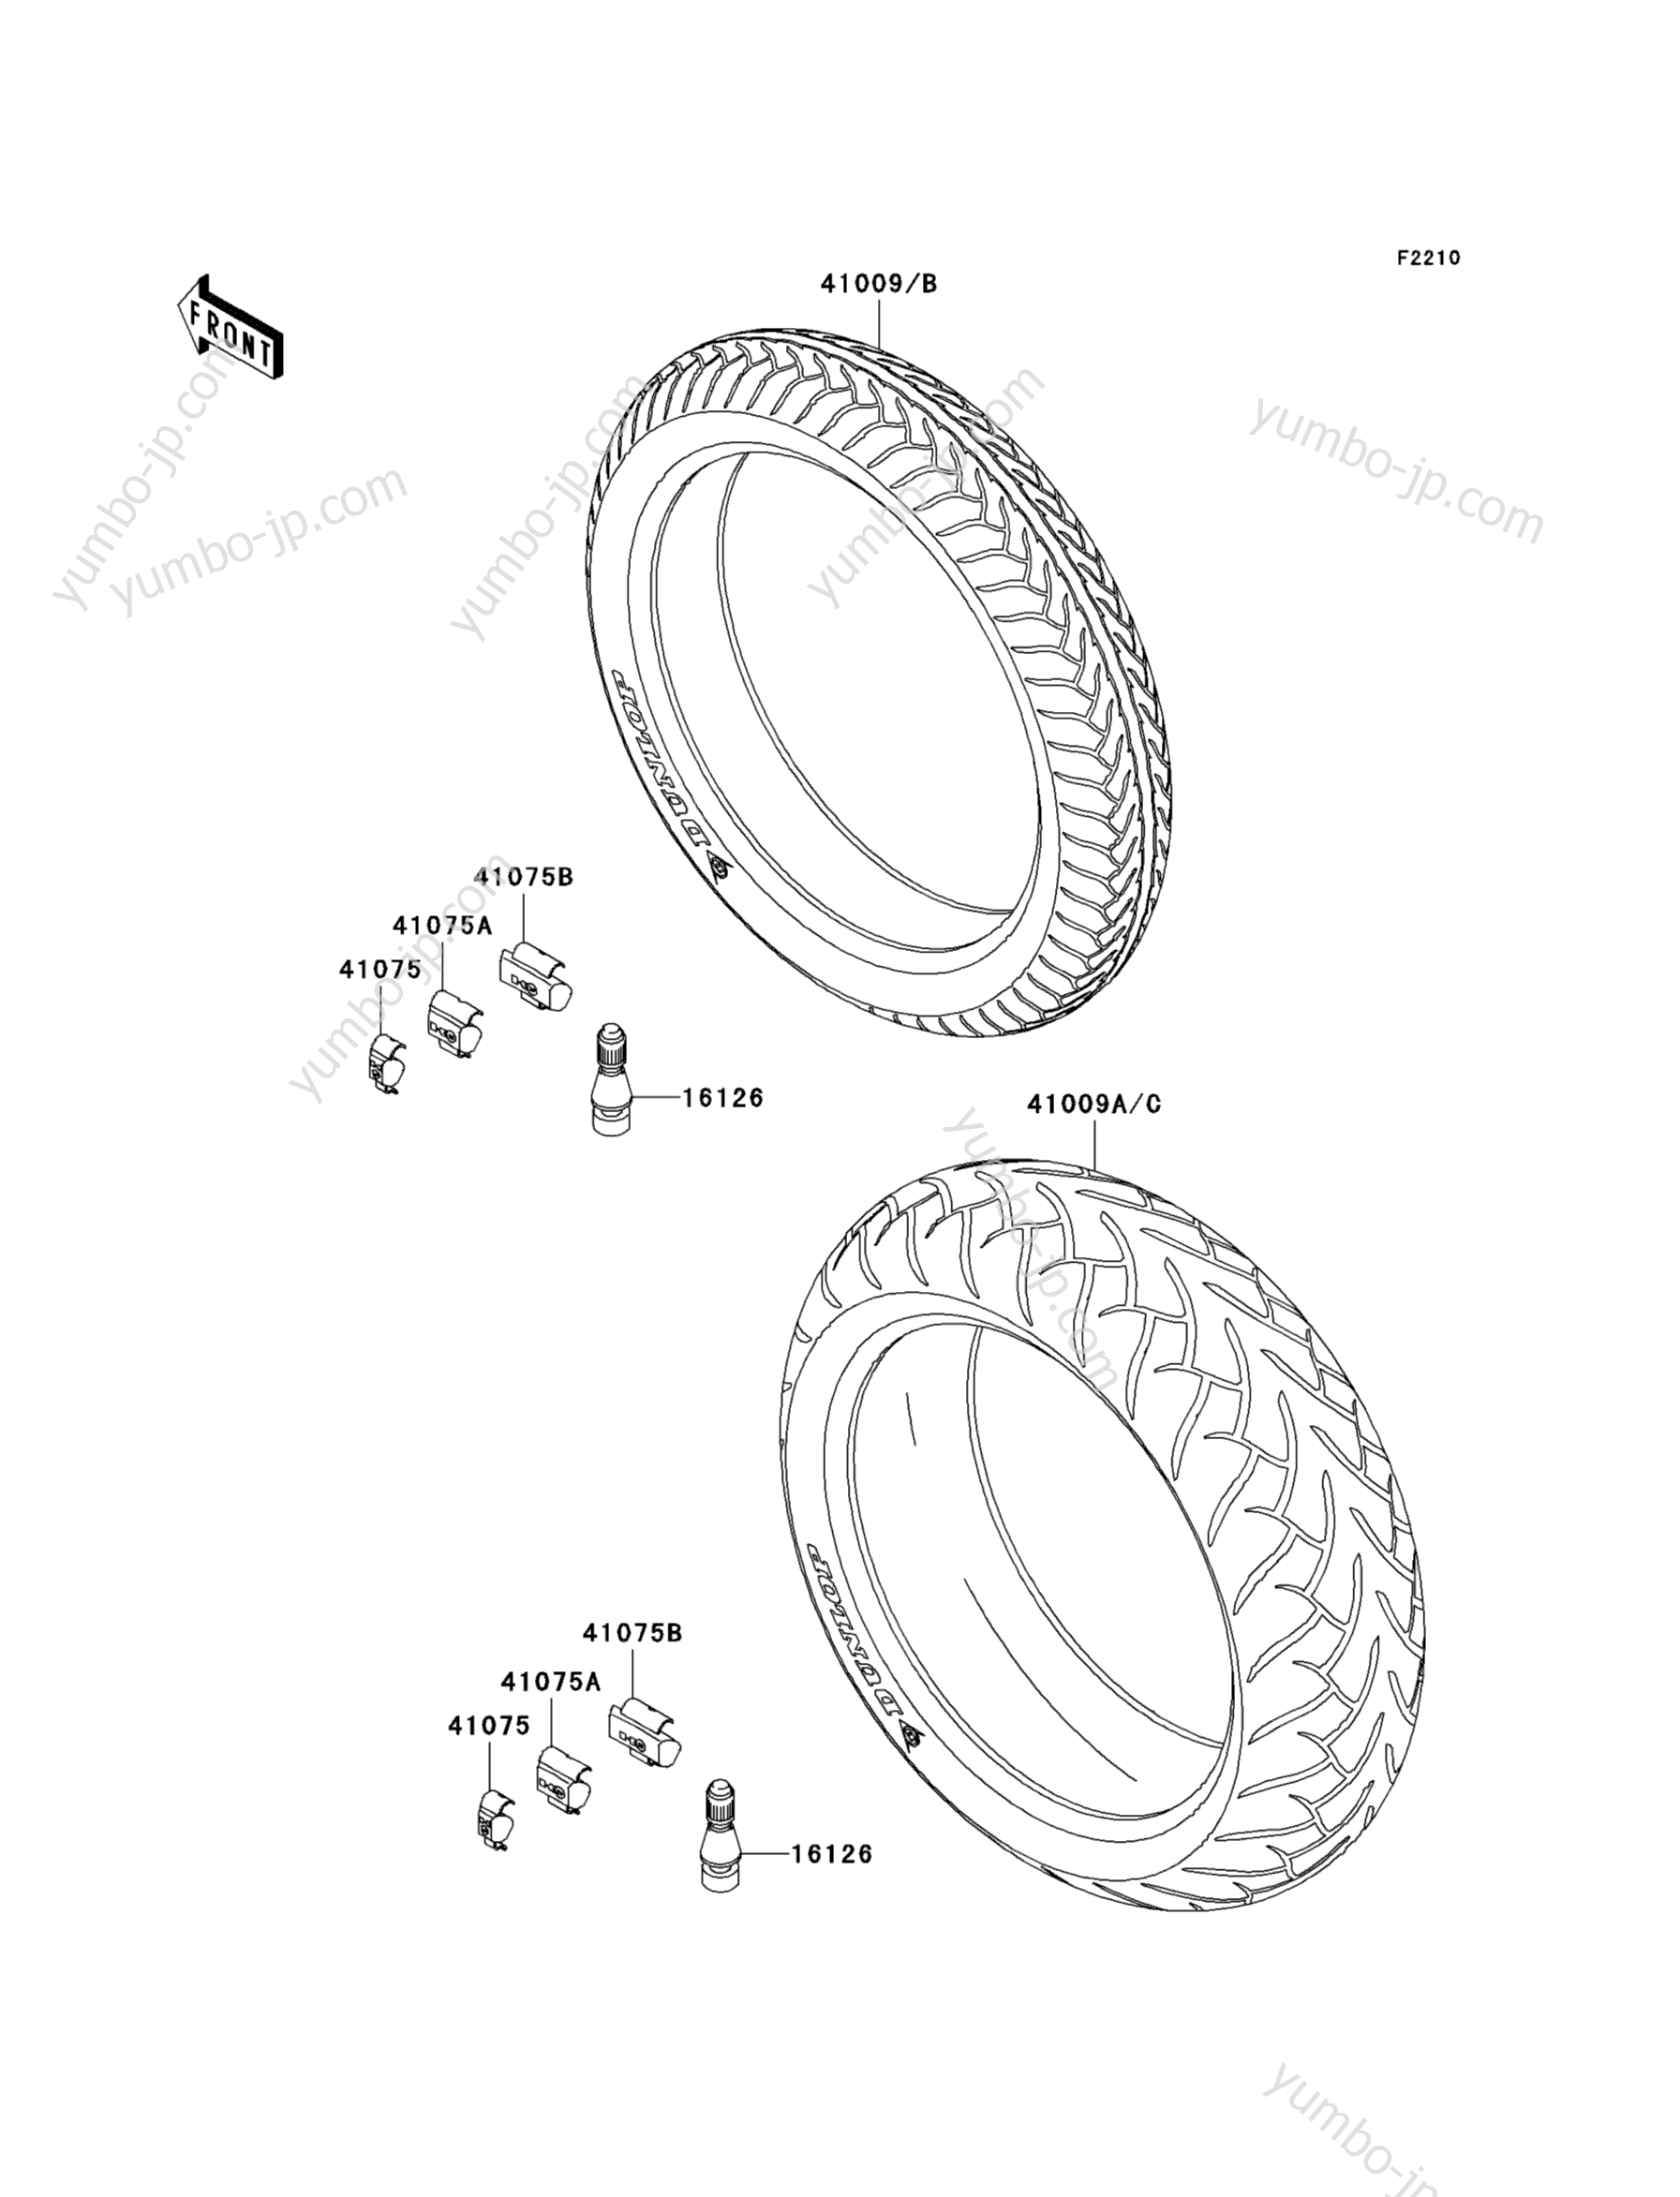 Tires for motorcycles KAWASAKI ZZR1200 (ZX1200-C1) 2002 year